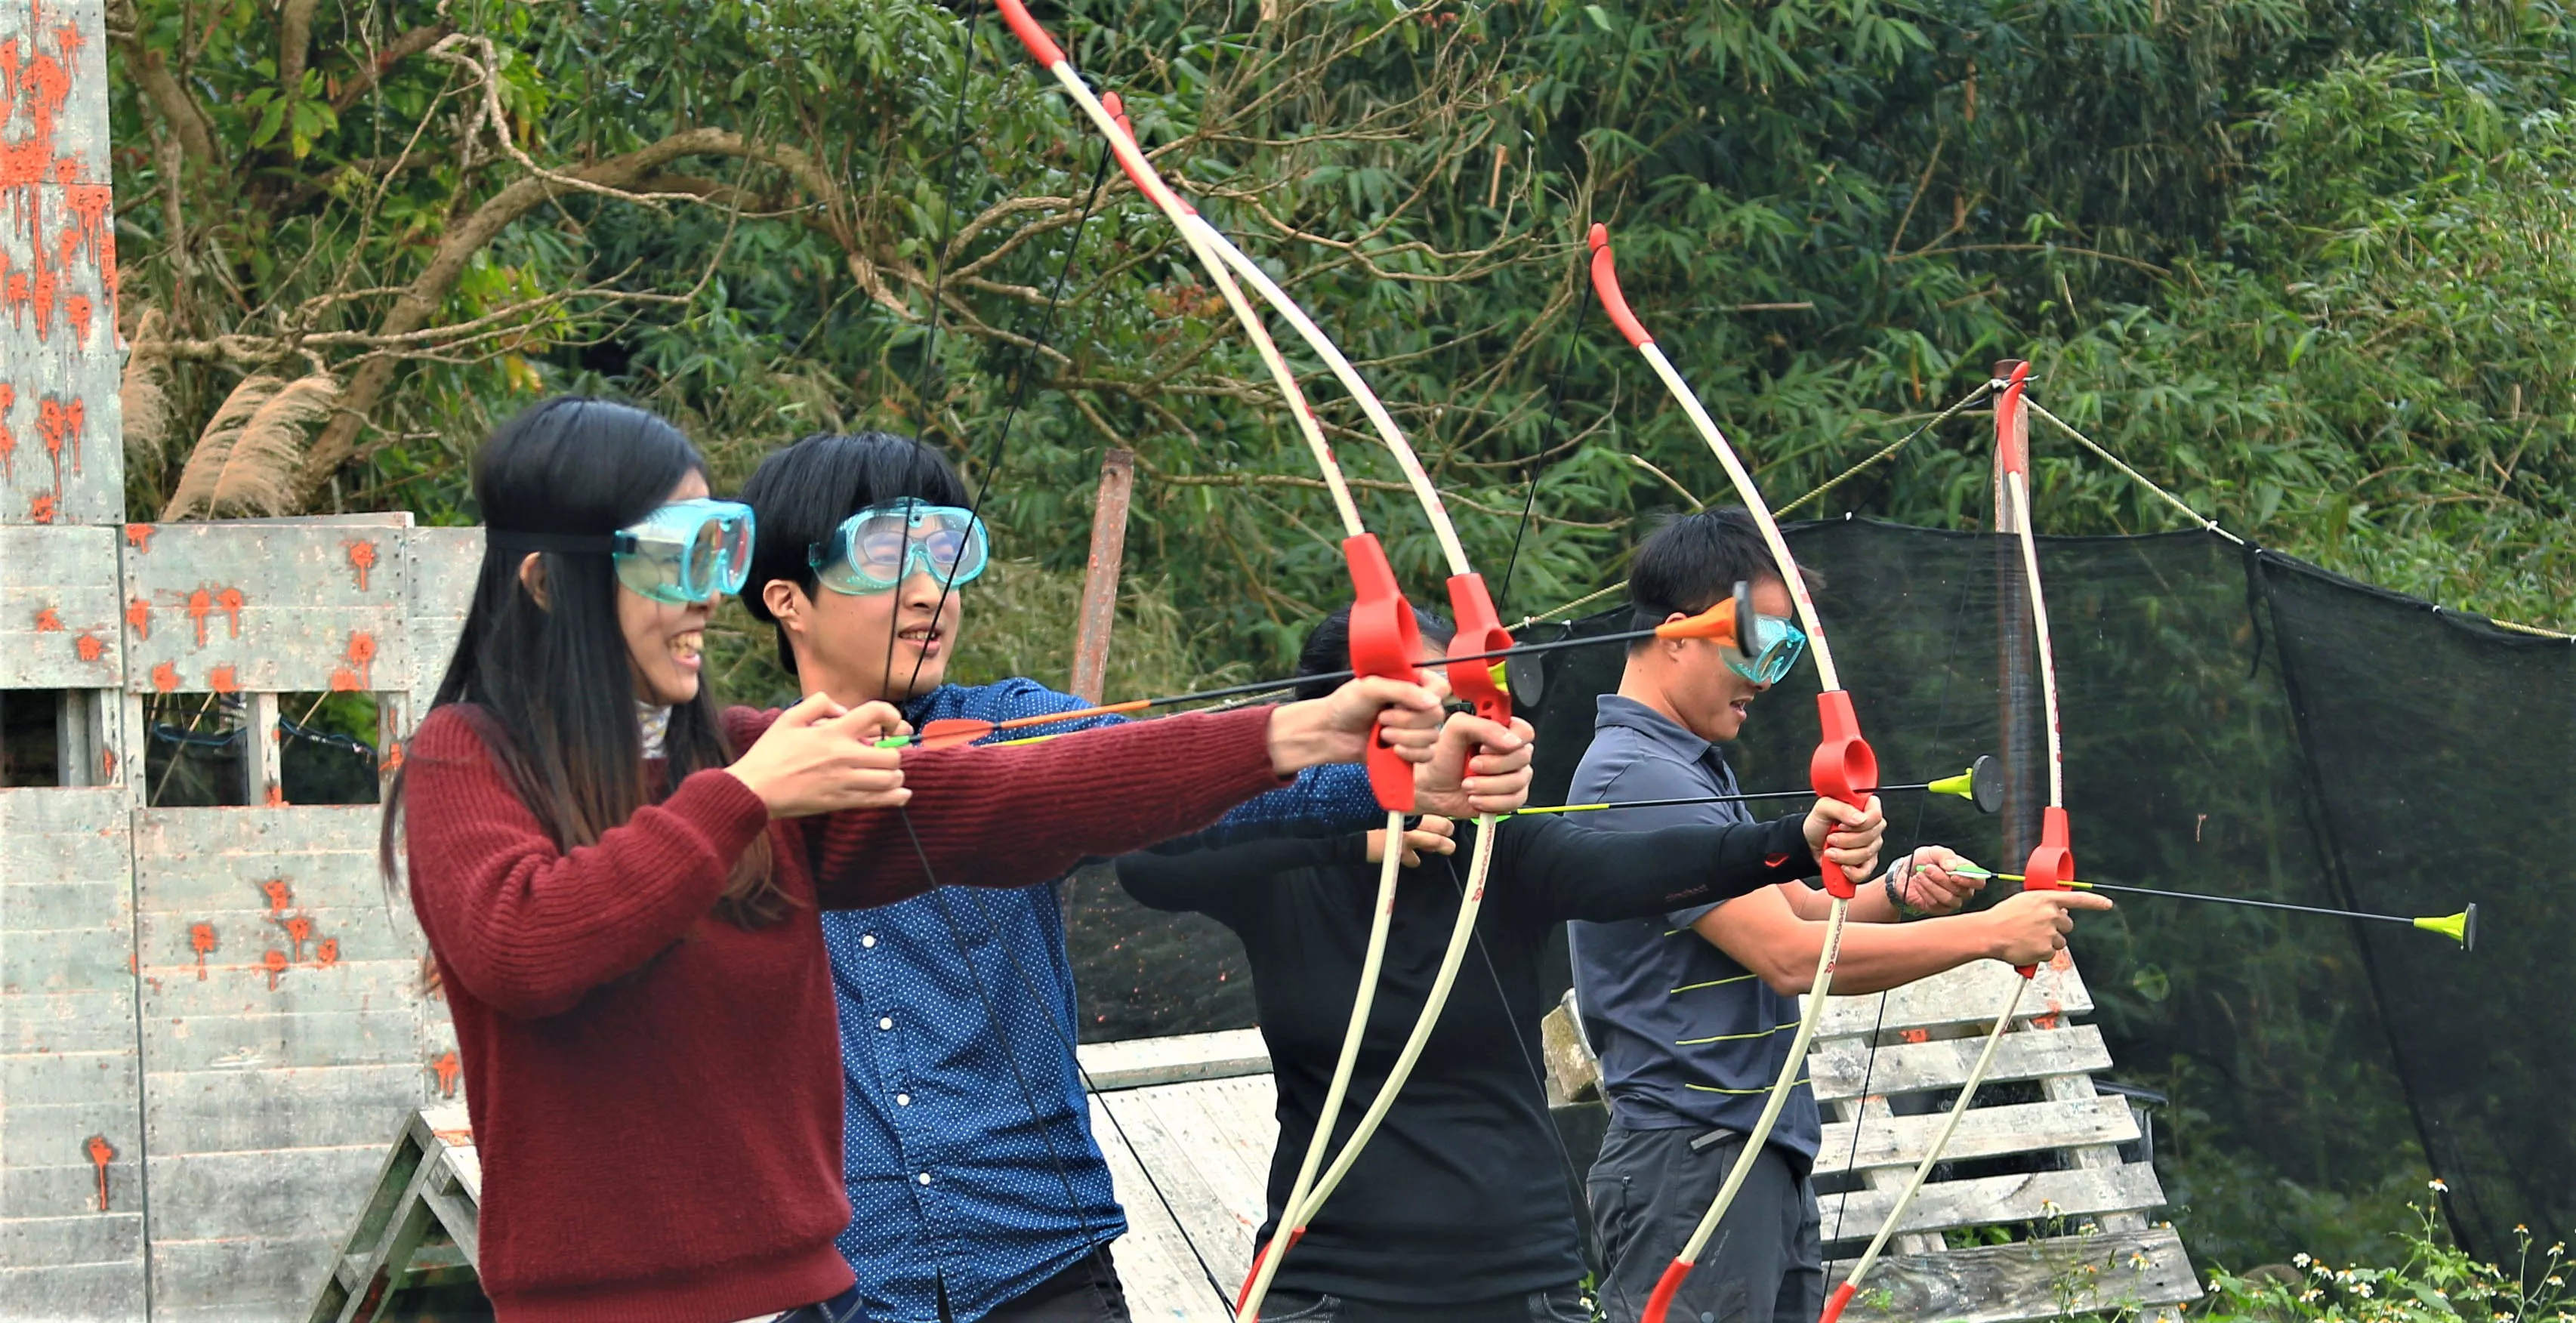 Archery range in Taiwan, East Asia | Archery - Rated 1.2